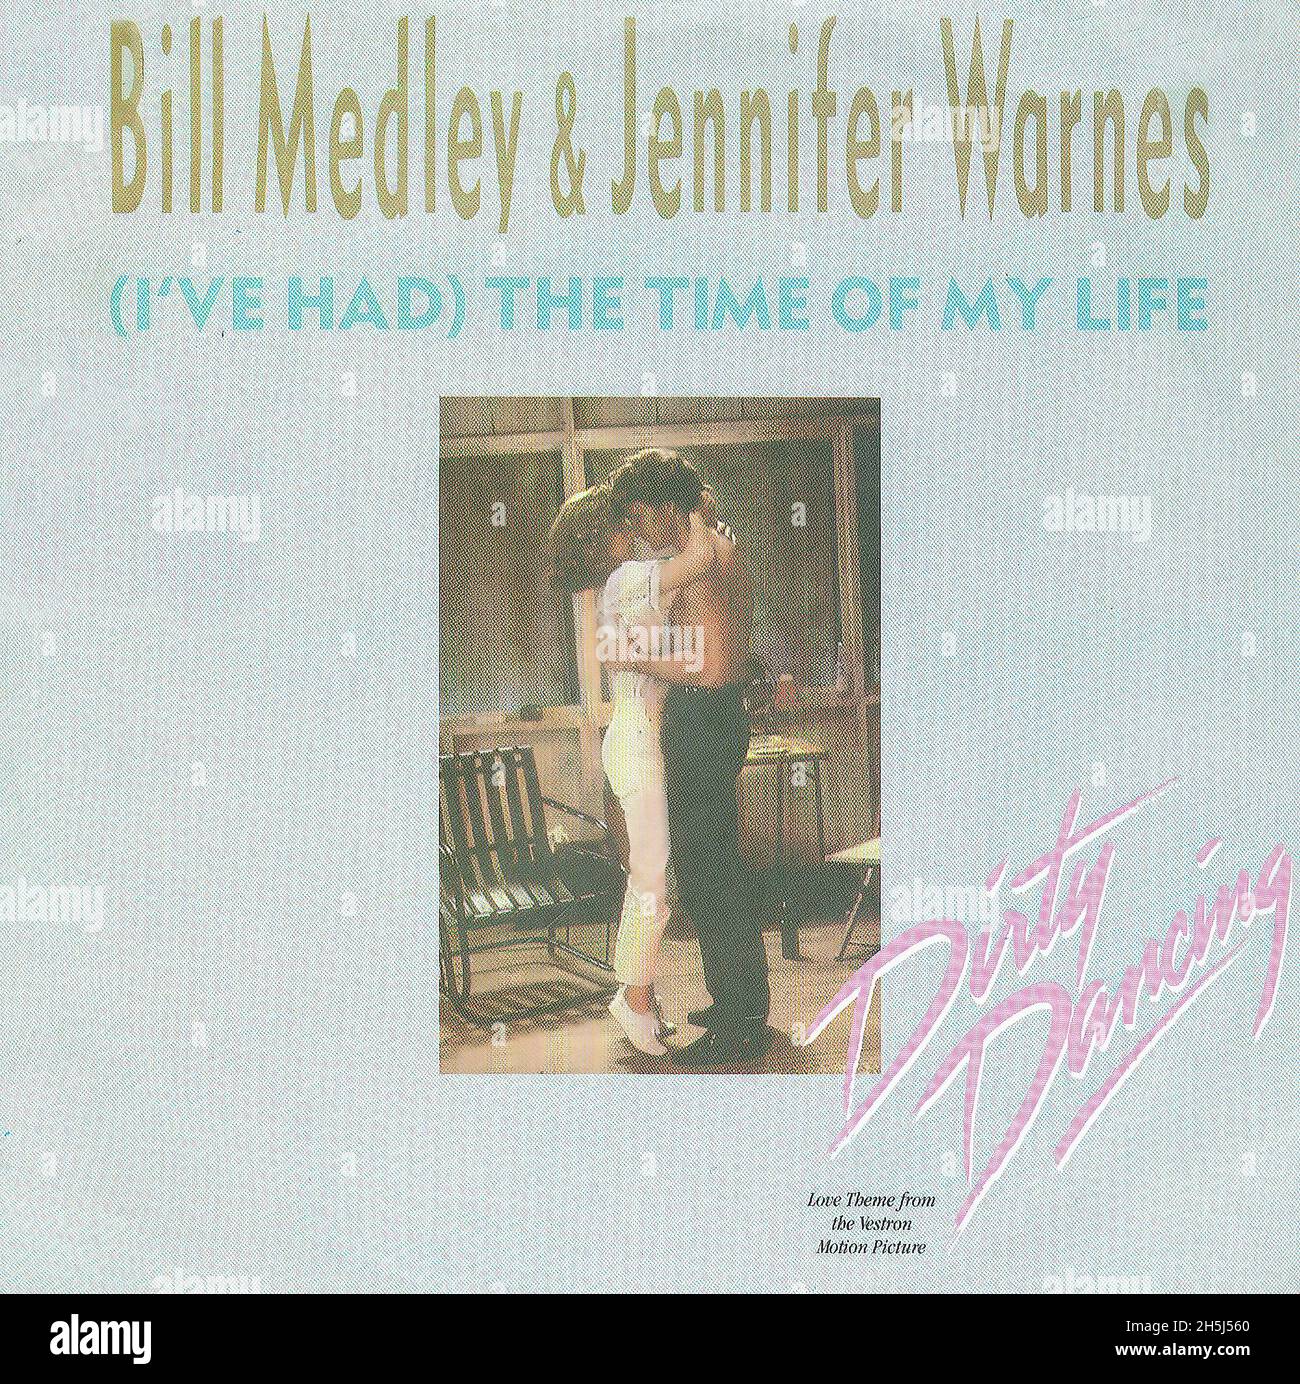 Vintage single record cover - Medley, Bill & Jennifer Warren  - (I've Had ) The Time Of My Life - D - 1987 Stock Photo